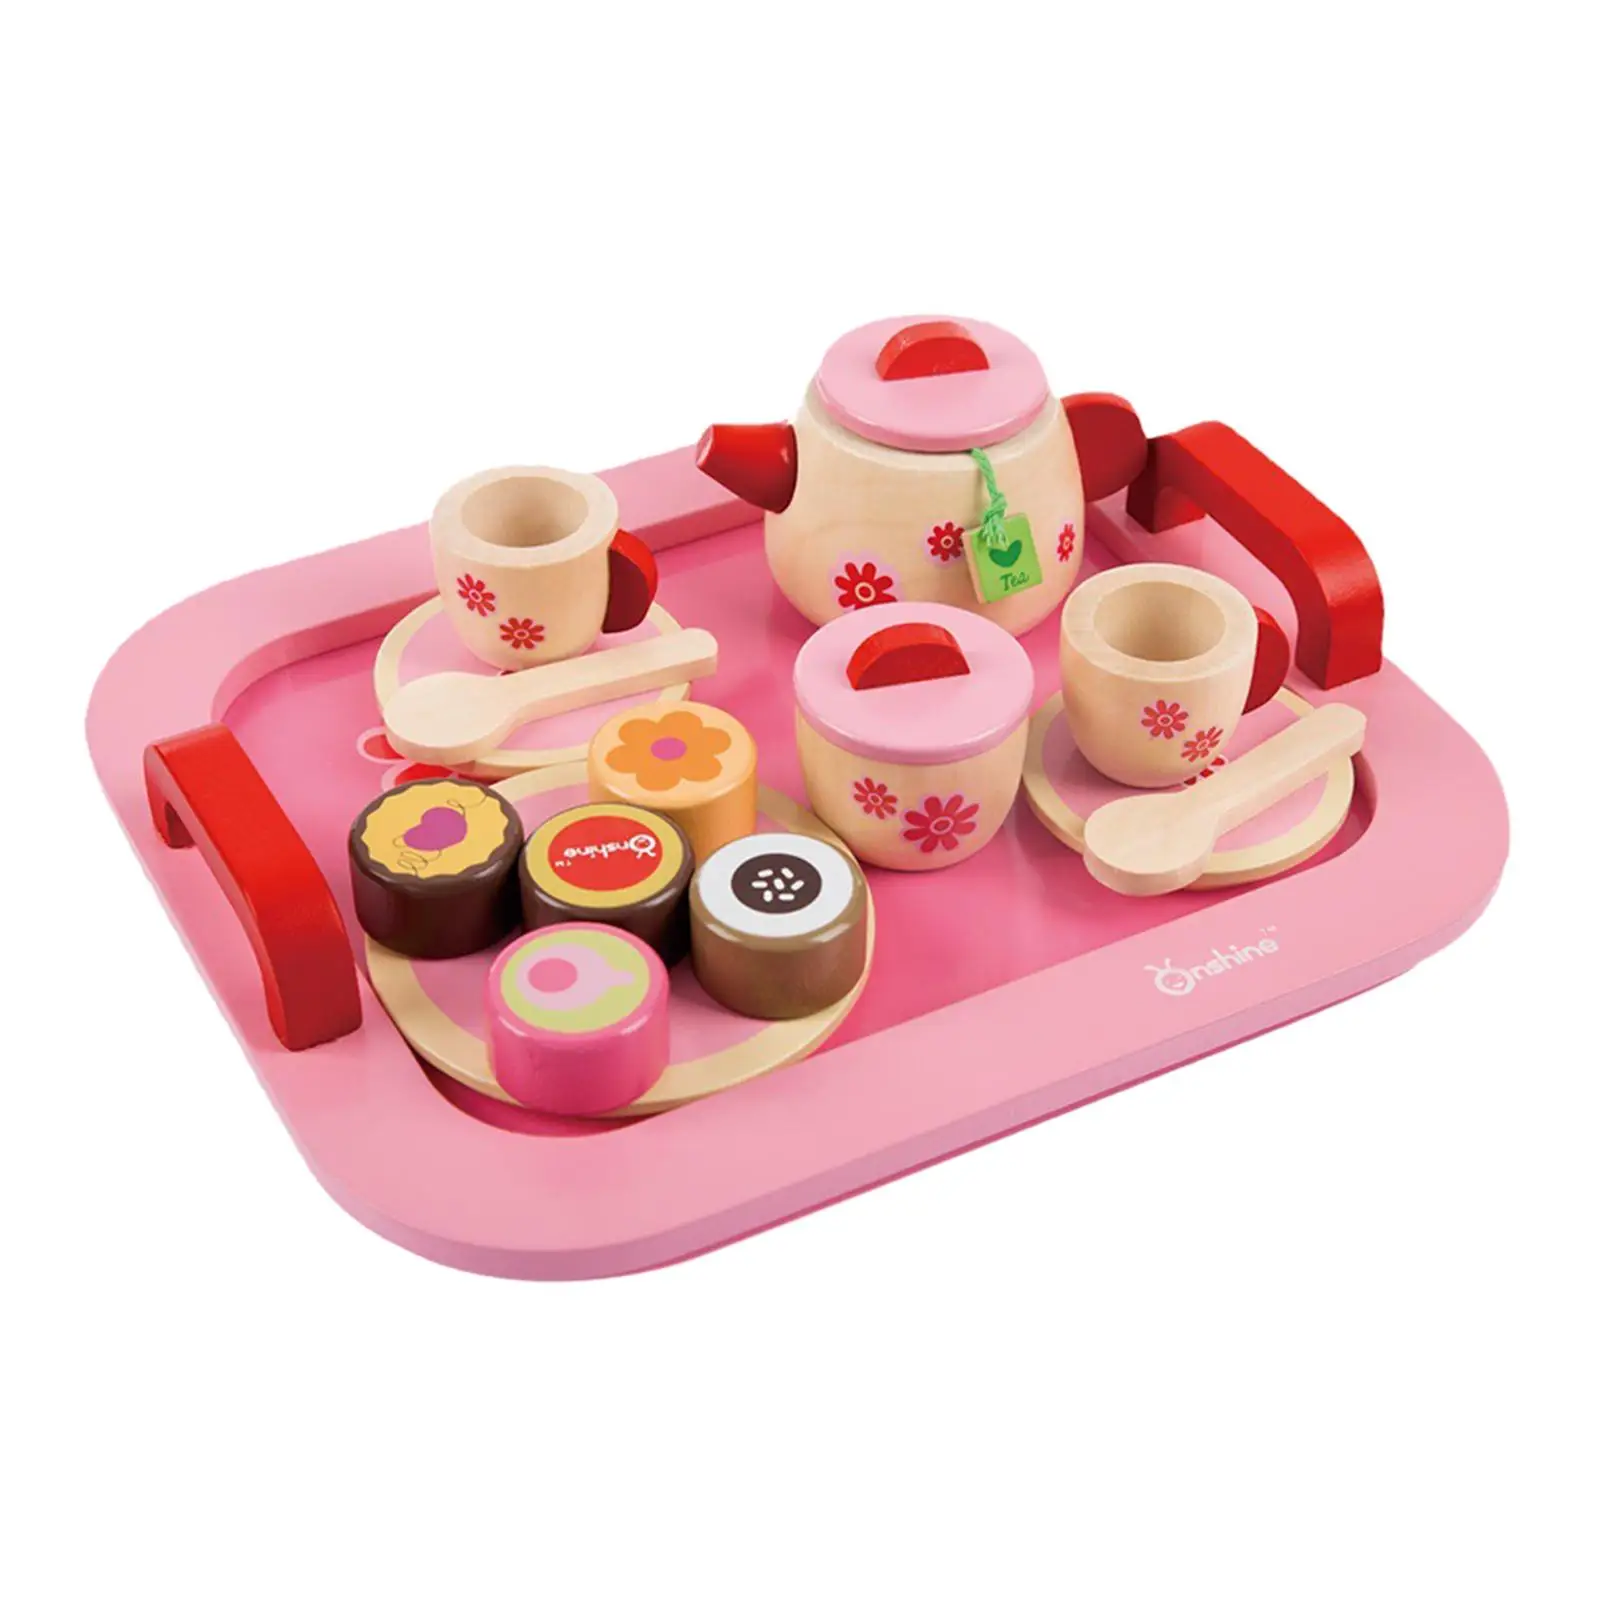 Play Tea Party Accessories Dessert Food Playset Interactive for Little Girls